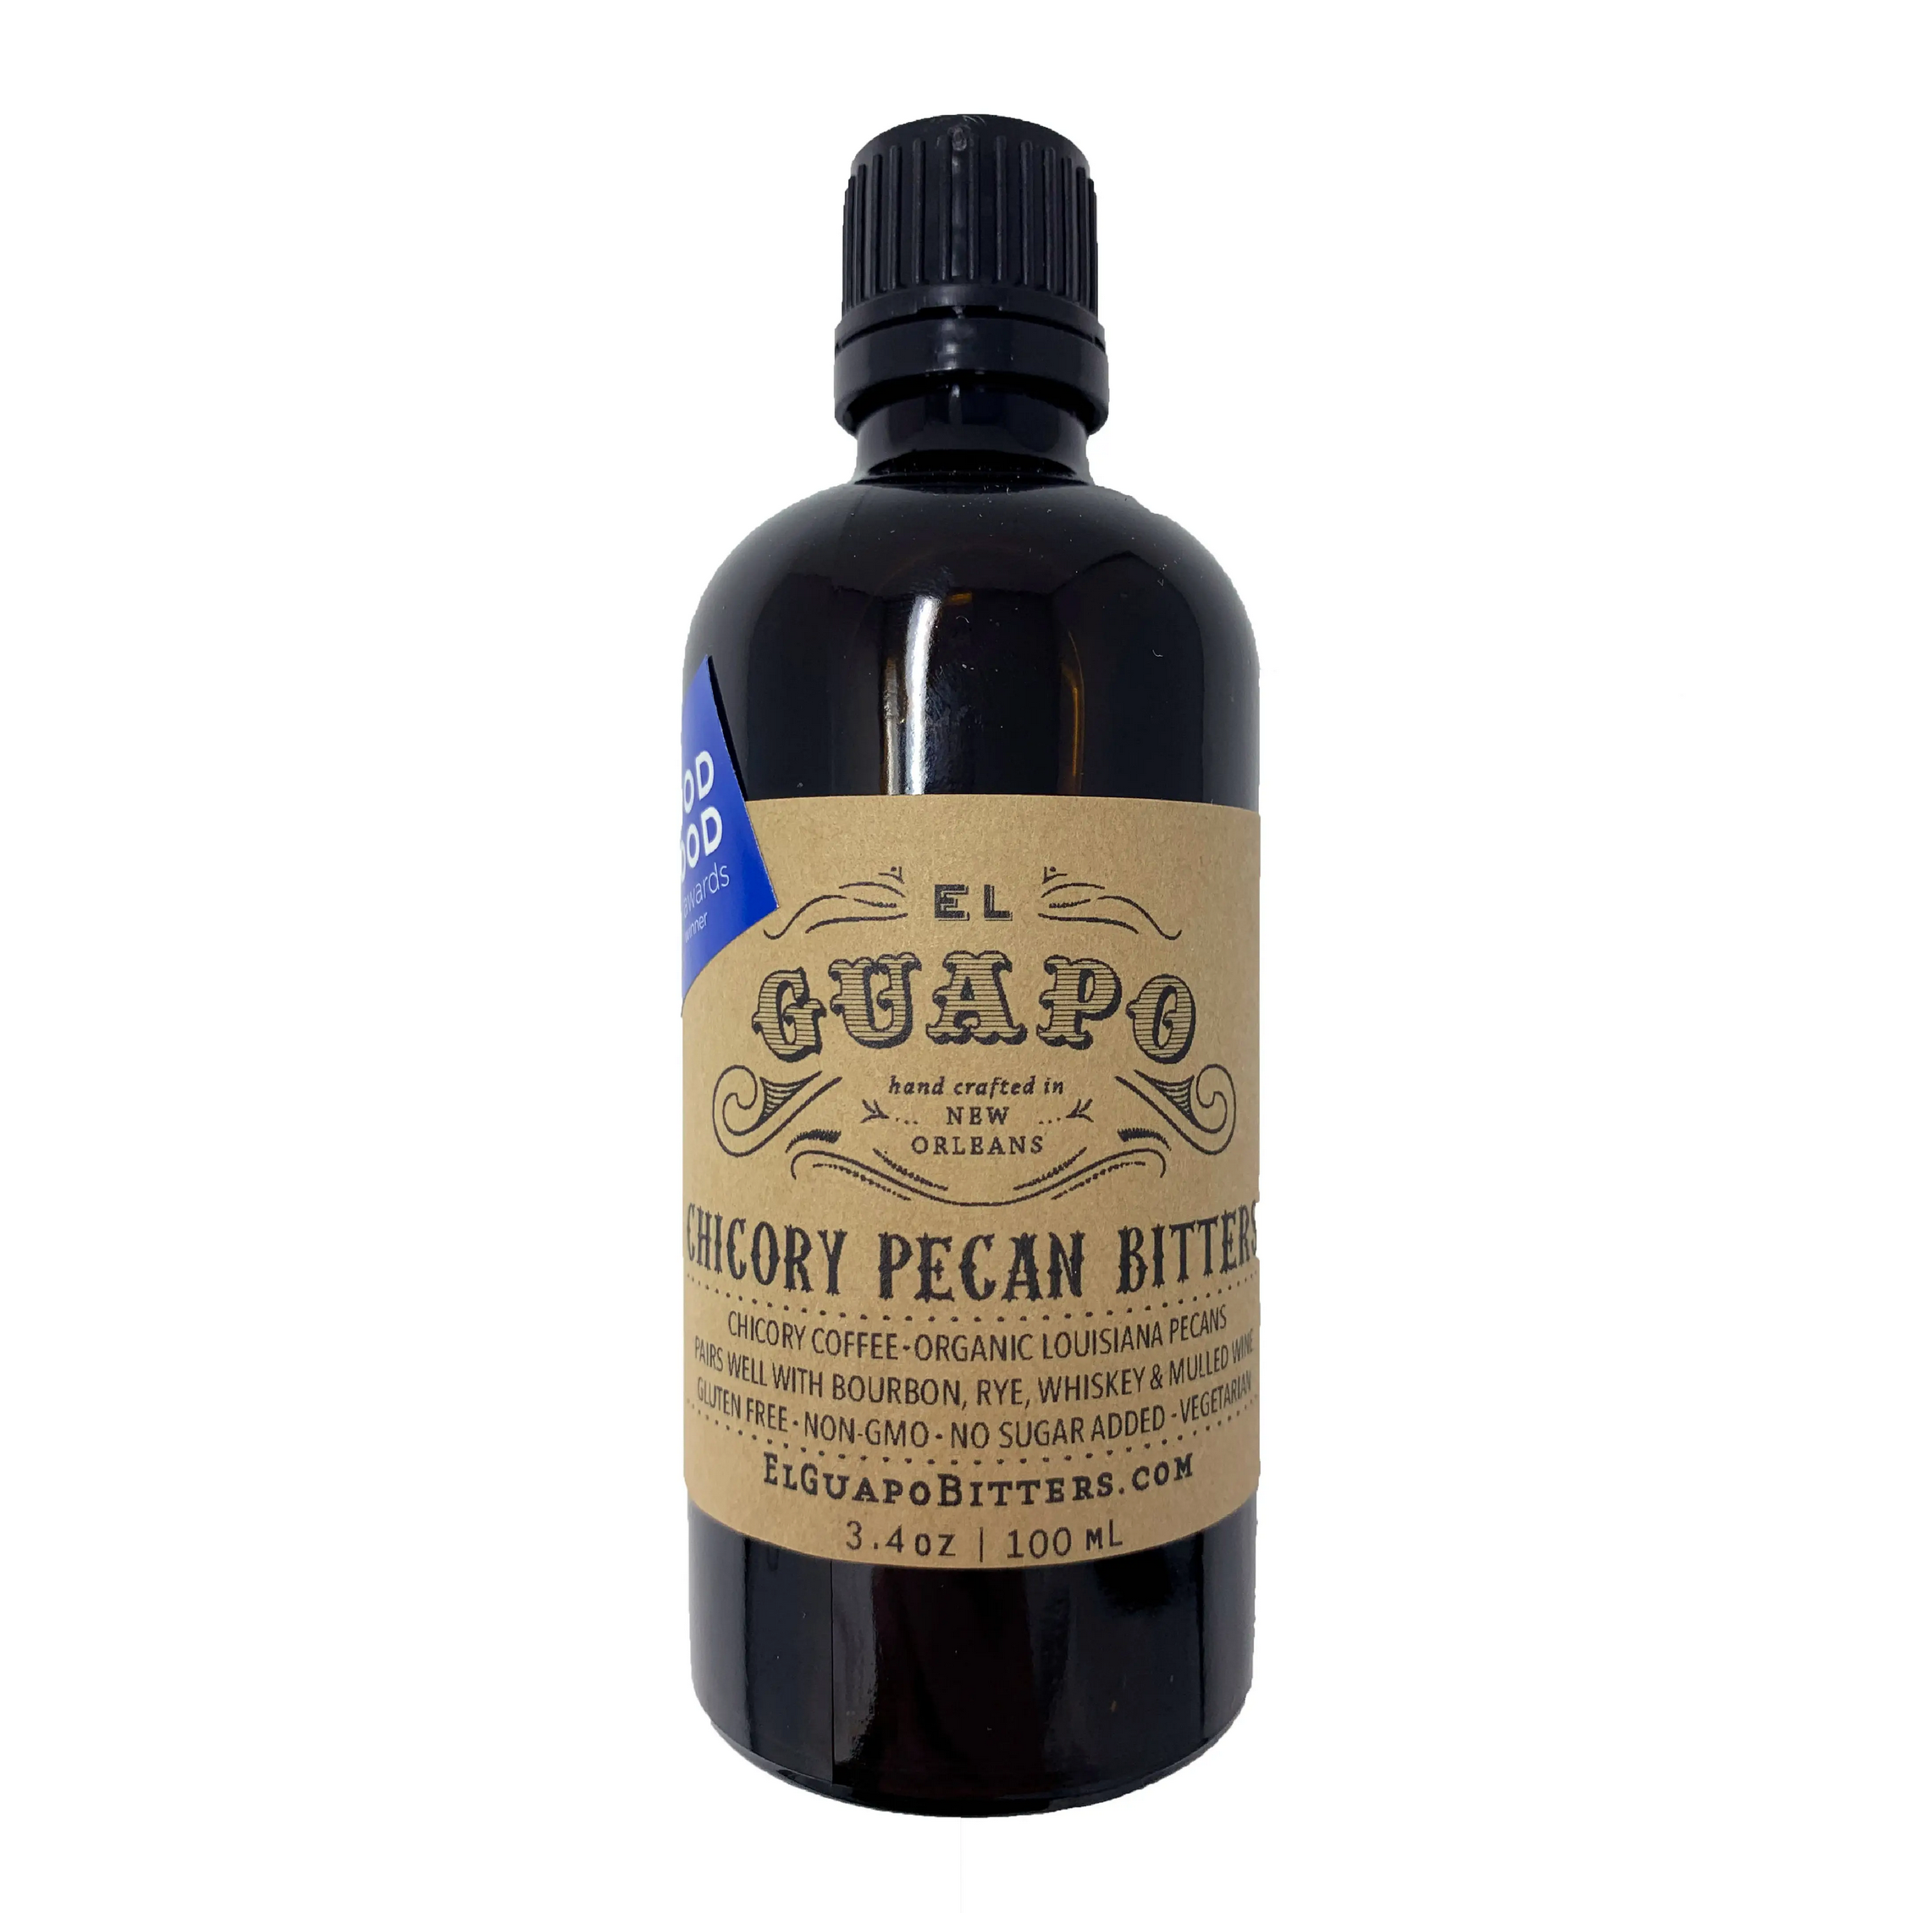 Chickory Pecan BITTERS